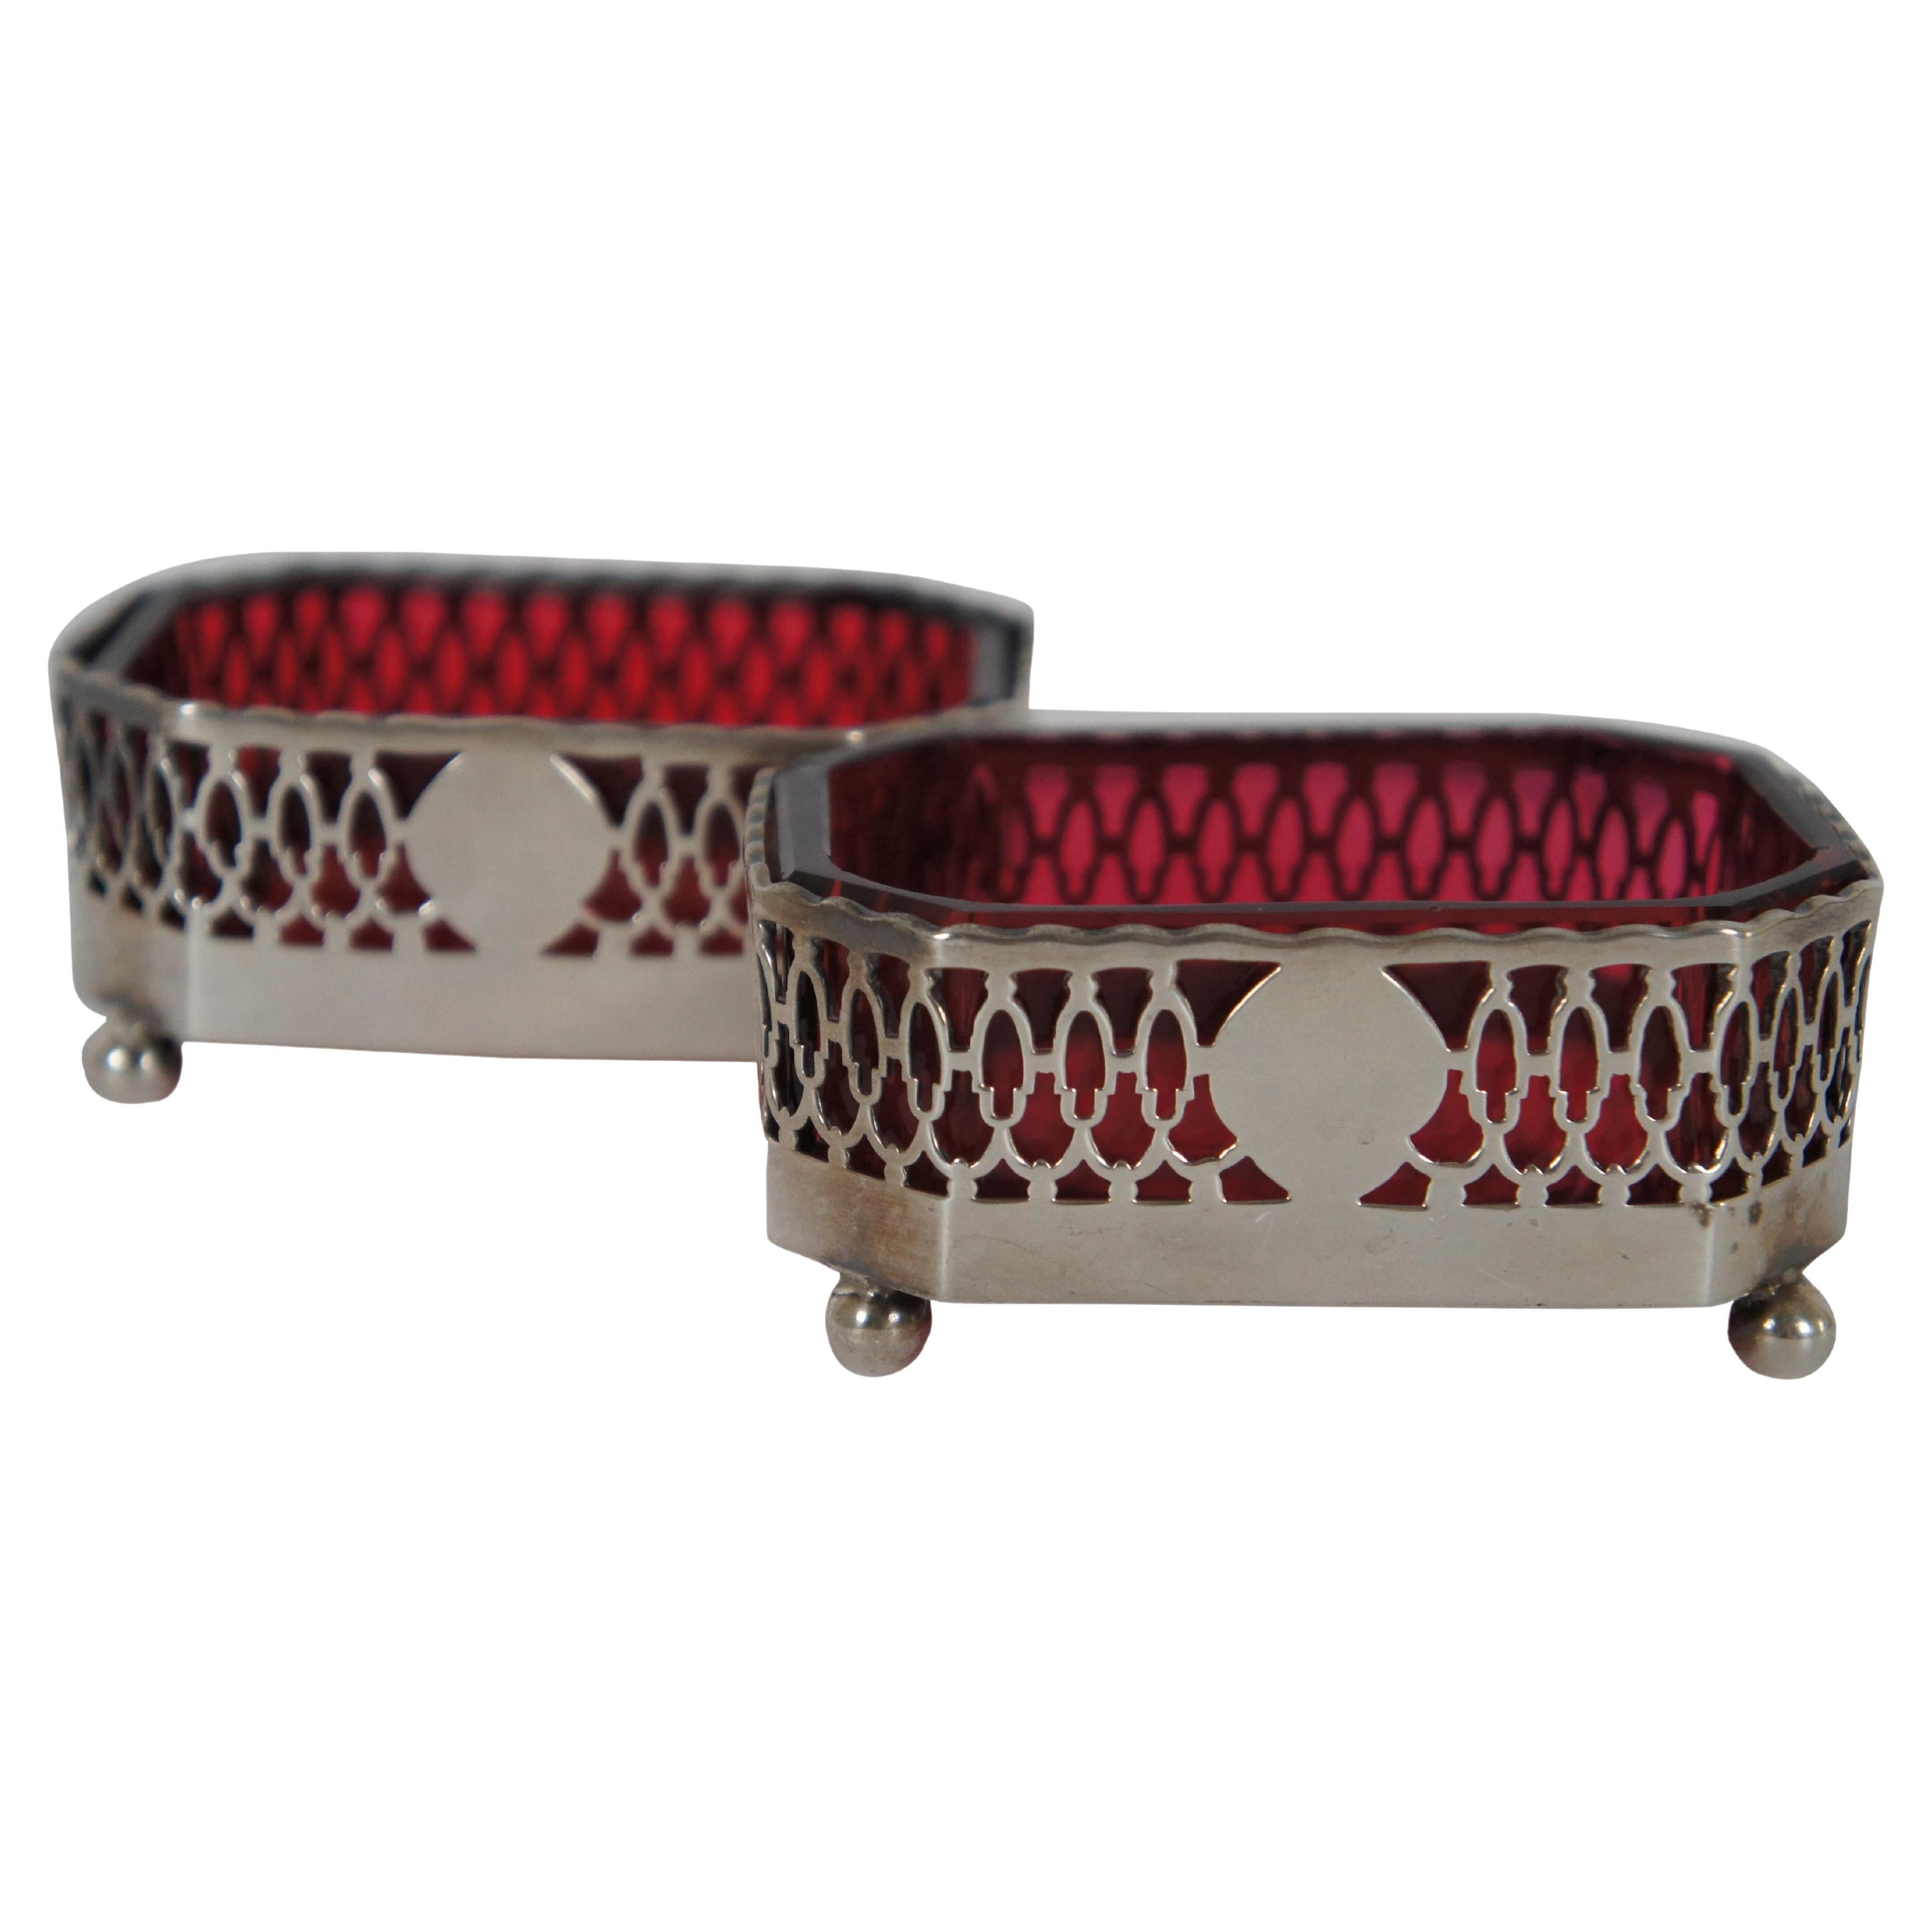 2 Dominick & Haff 720 Reticulated Sterling & Cranberry Glass Nut Dish Pair 86g For Sale